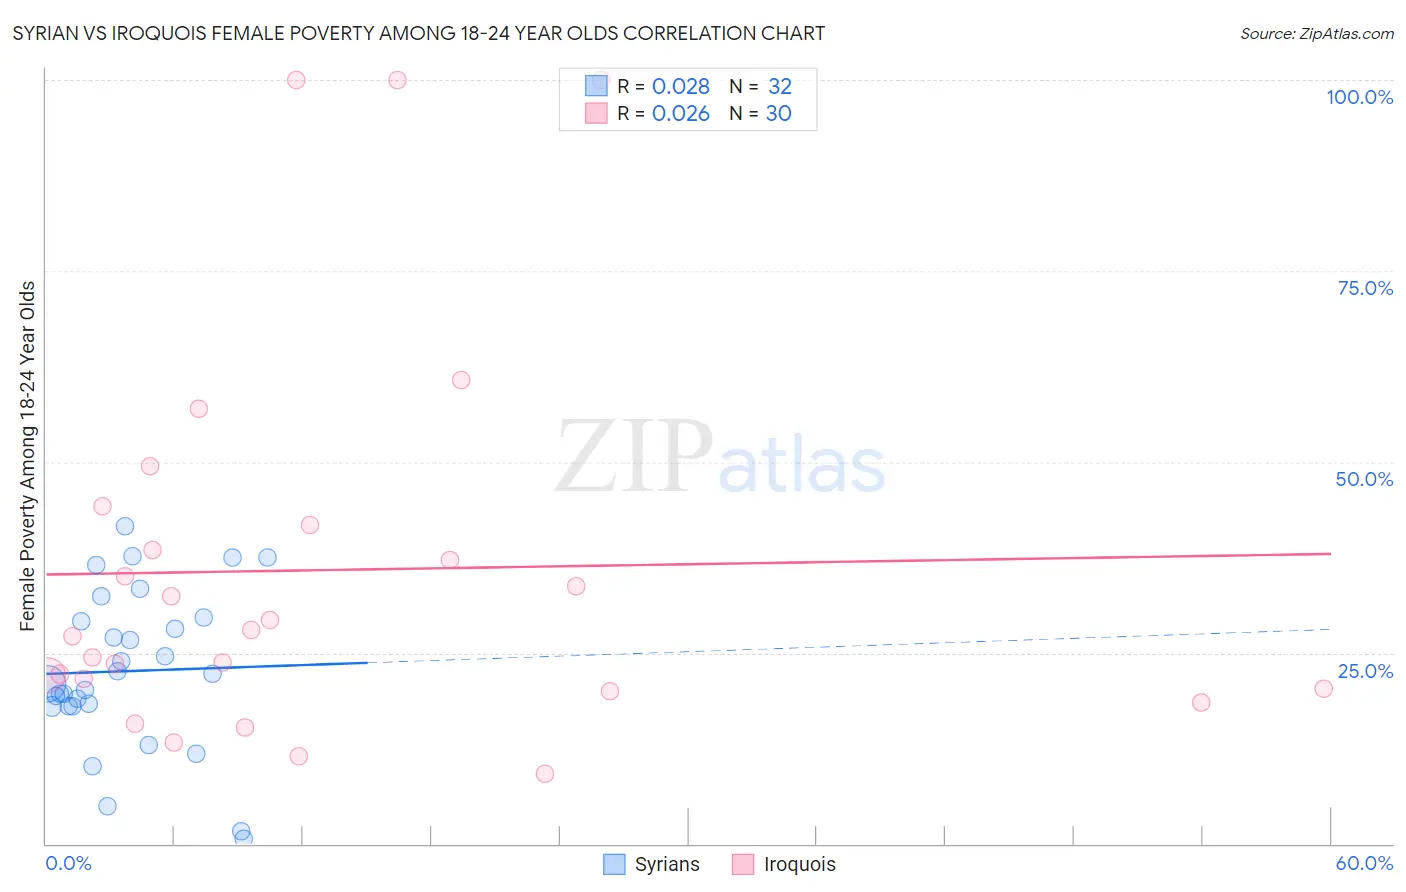 Syrian vs Iroquois Female Poverty Among 18-24 Year Olds